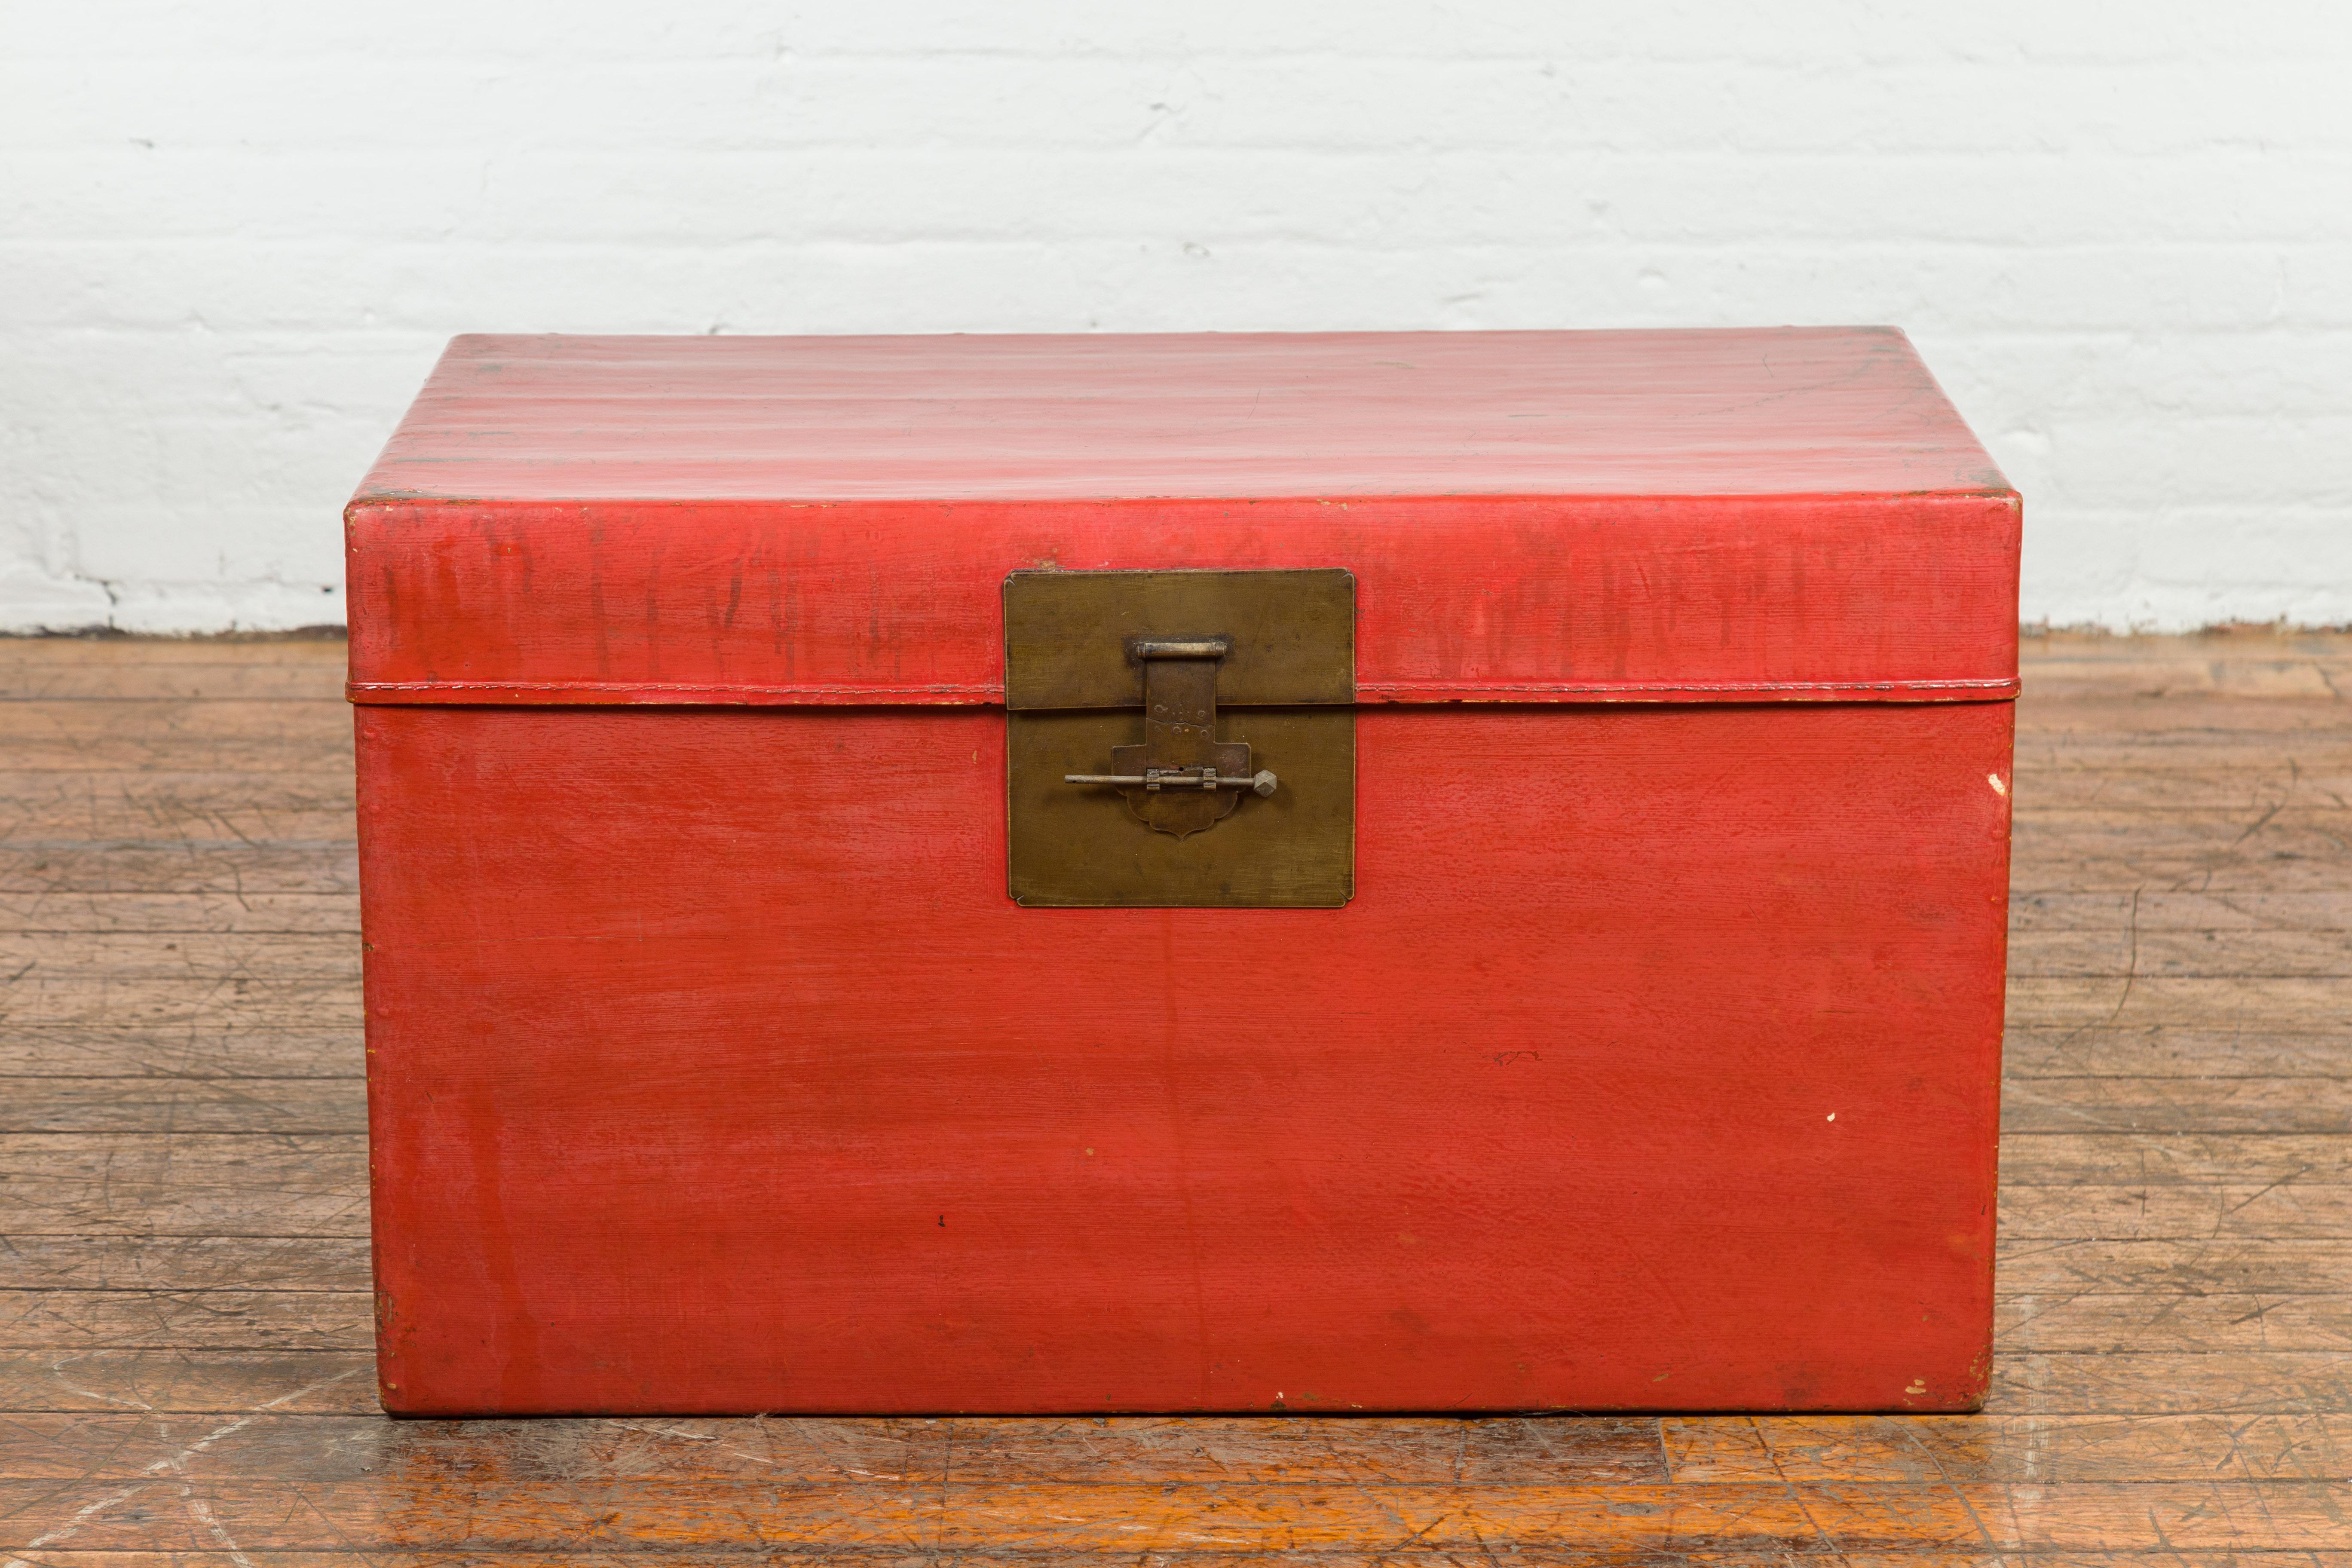 A vintage Chinese red lacquer blanket chest from the mid 20th century with brass hardware and lateral c-scroll handles. This mid-20th-century Chinese red lacquer blanket chest manifests an exquisite blend of simplicity, functionality, and